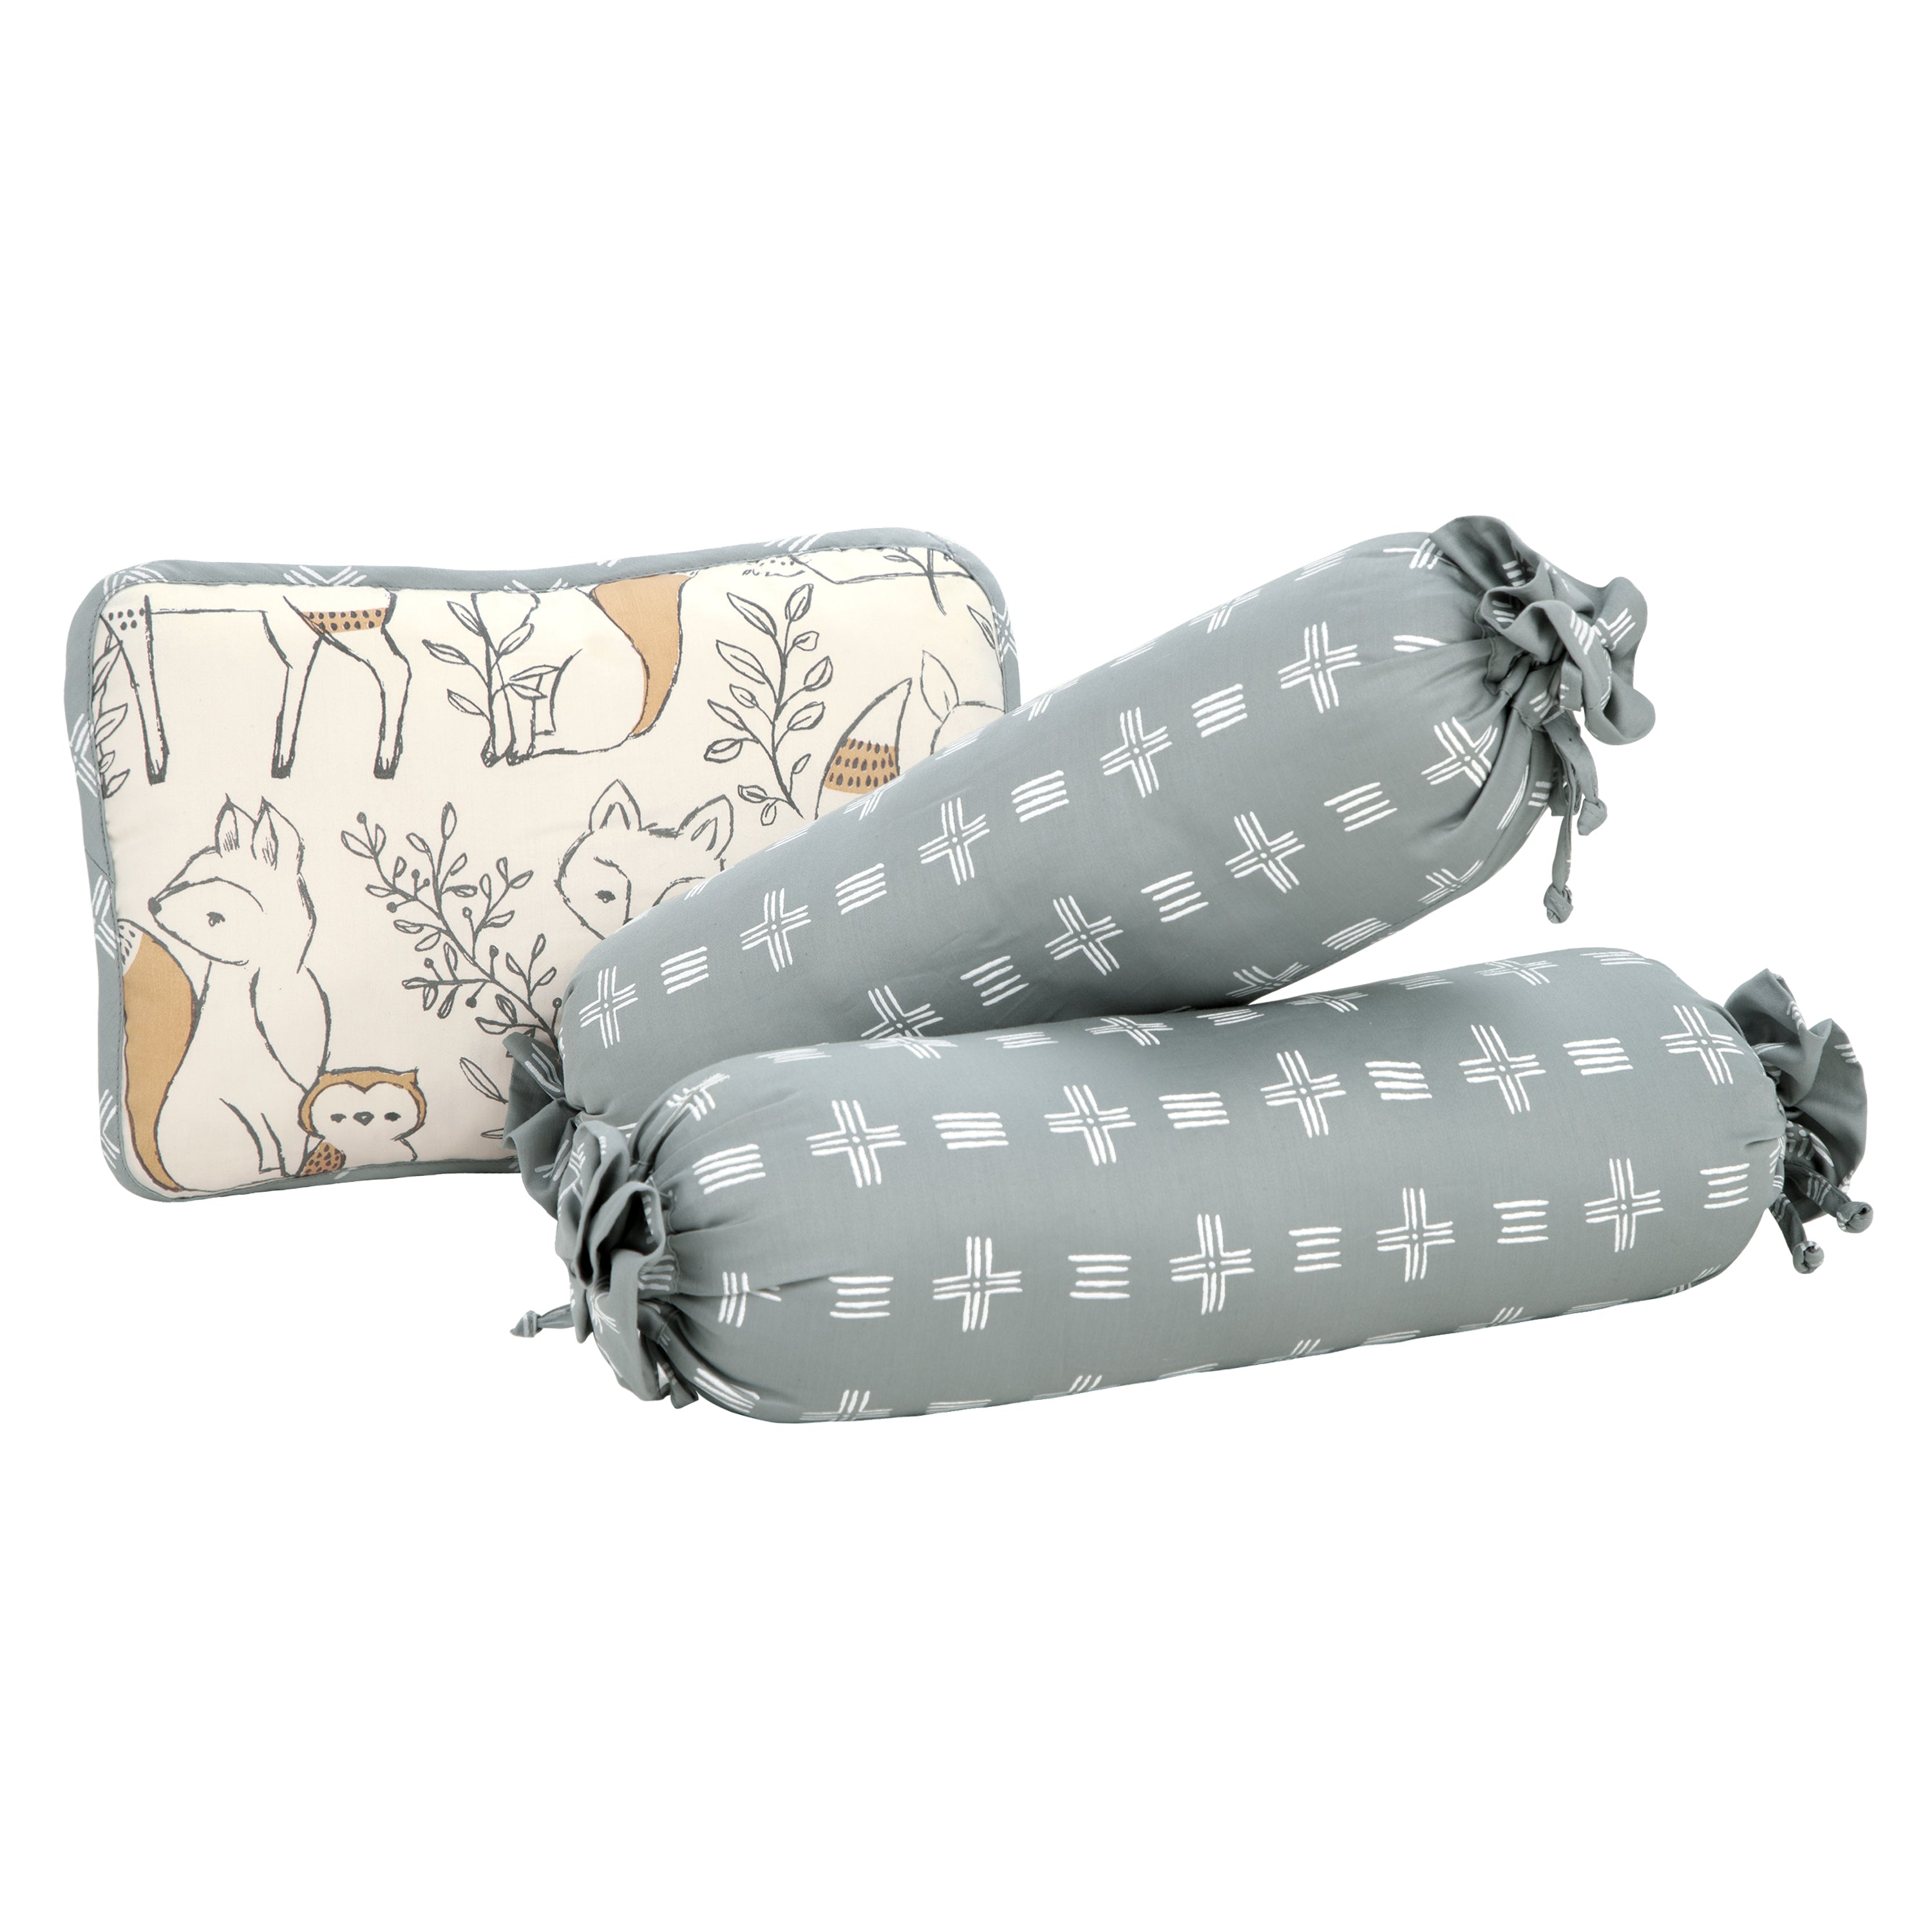 Crane Baby Pillow And Bolster Set Ezra Collection, Pack Of 3 - Multicolor